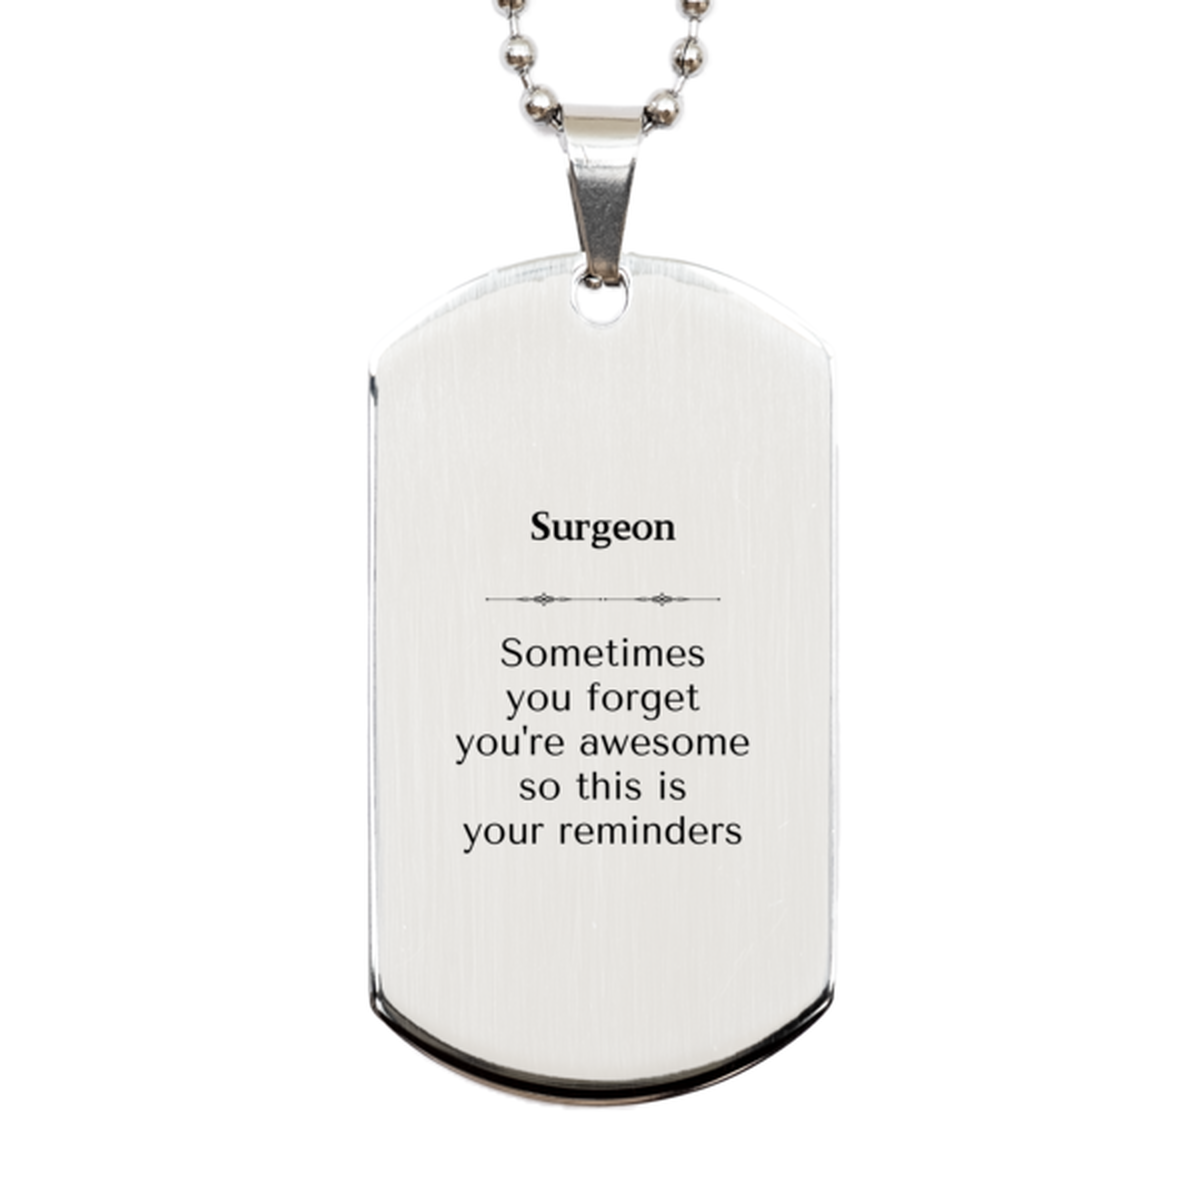 Sentimental Surgeon Silver Dog Tag, Surgeon Sometimes you forget you're awesome so this is your reminders, Graduation Christmas Birthday Gifts for Surgeon, Men, Women, Coworkers